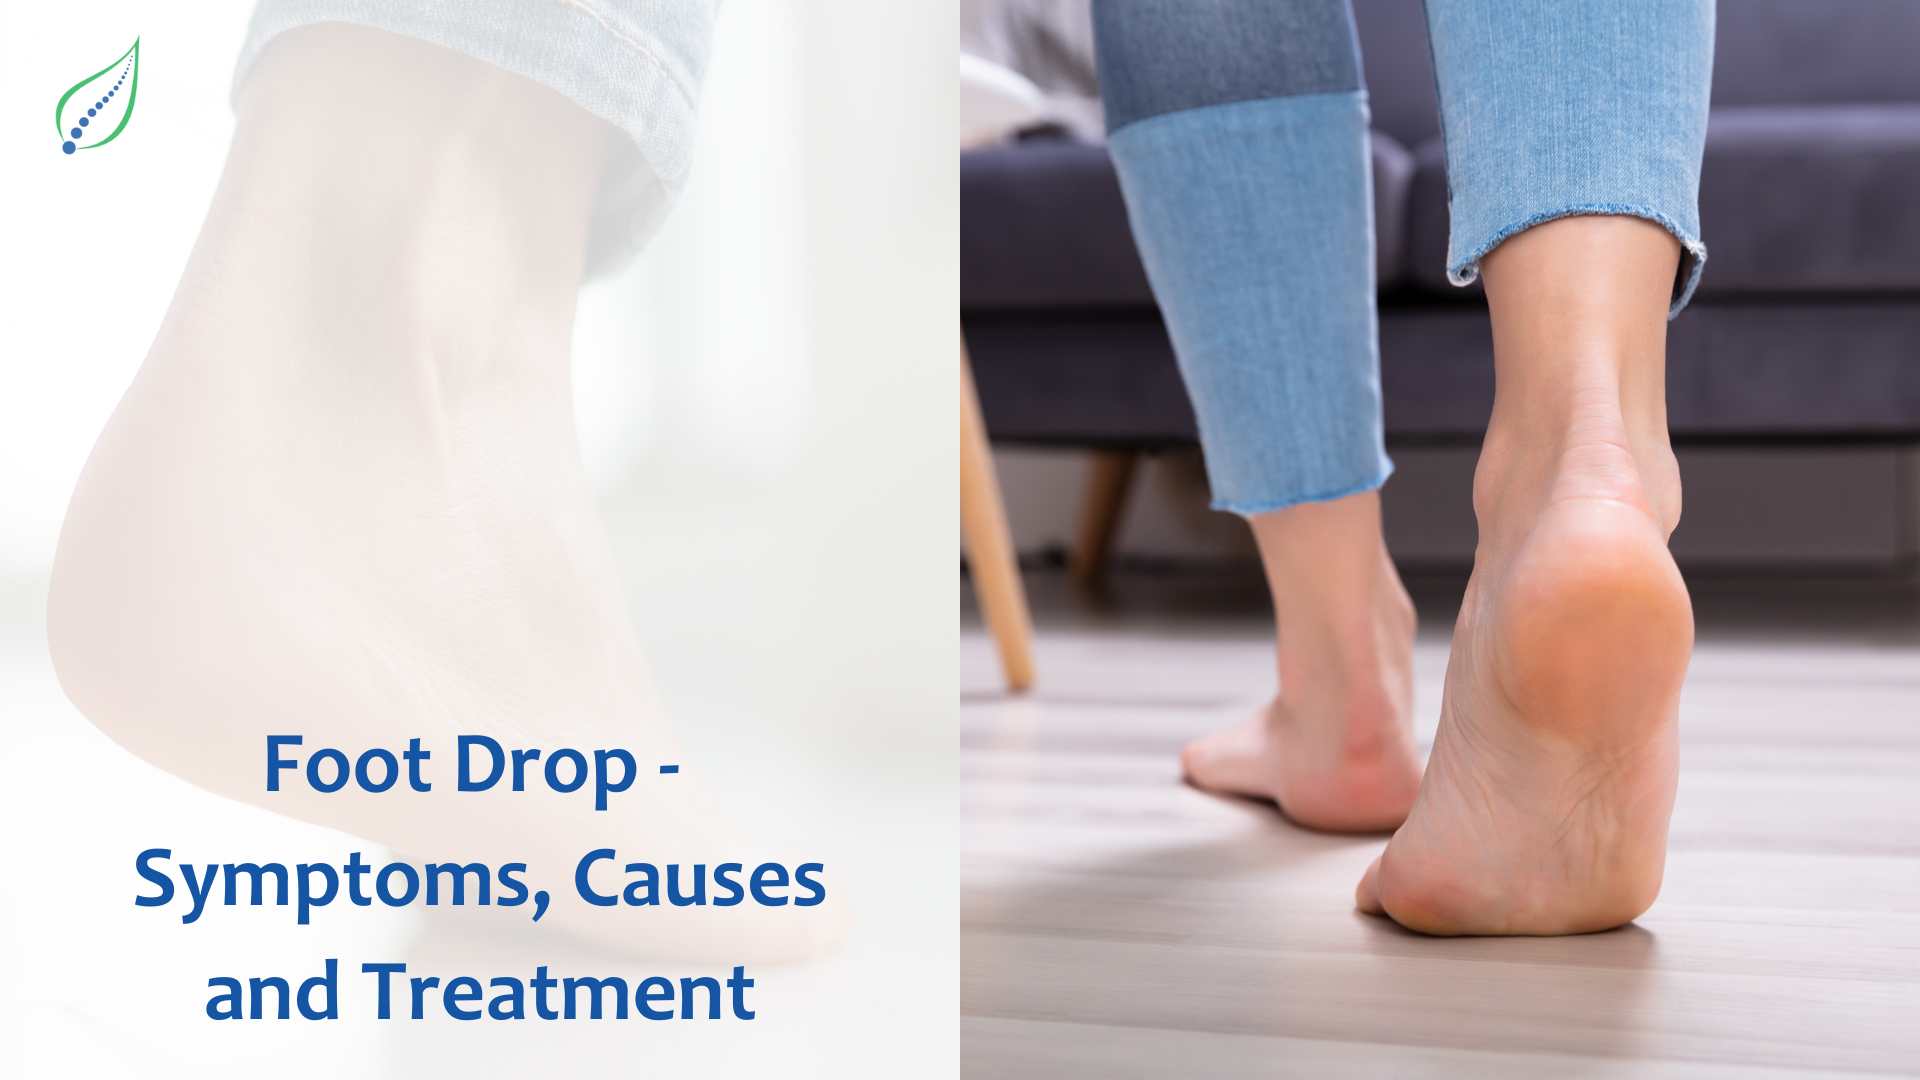 What Is Foot Drop (and What Causes This Peroneal Nerve Injury)?